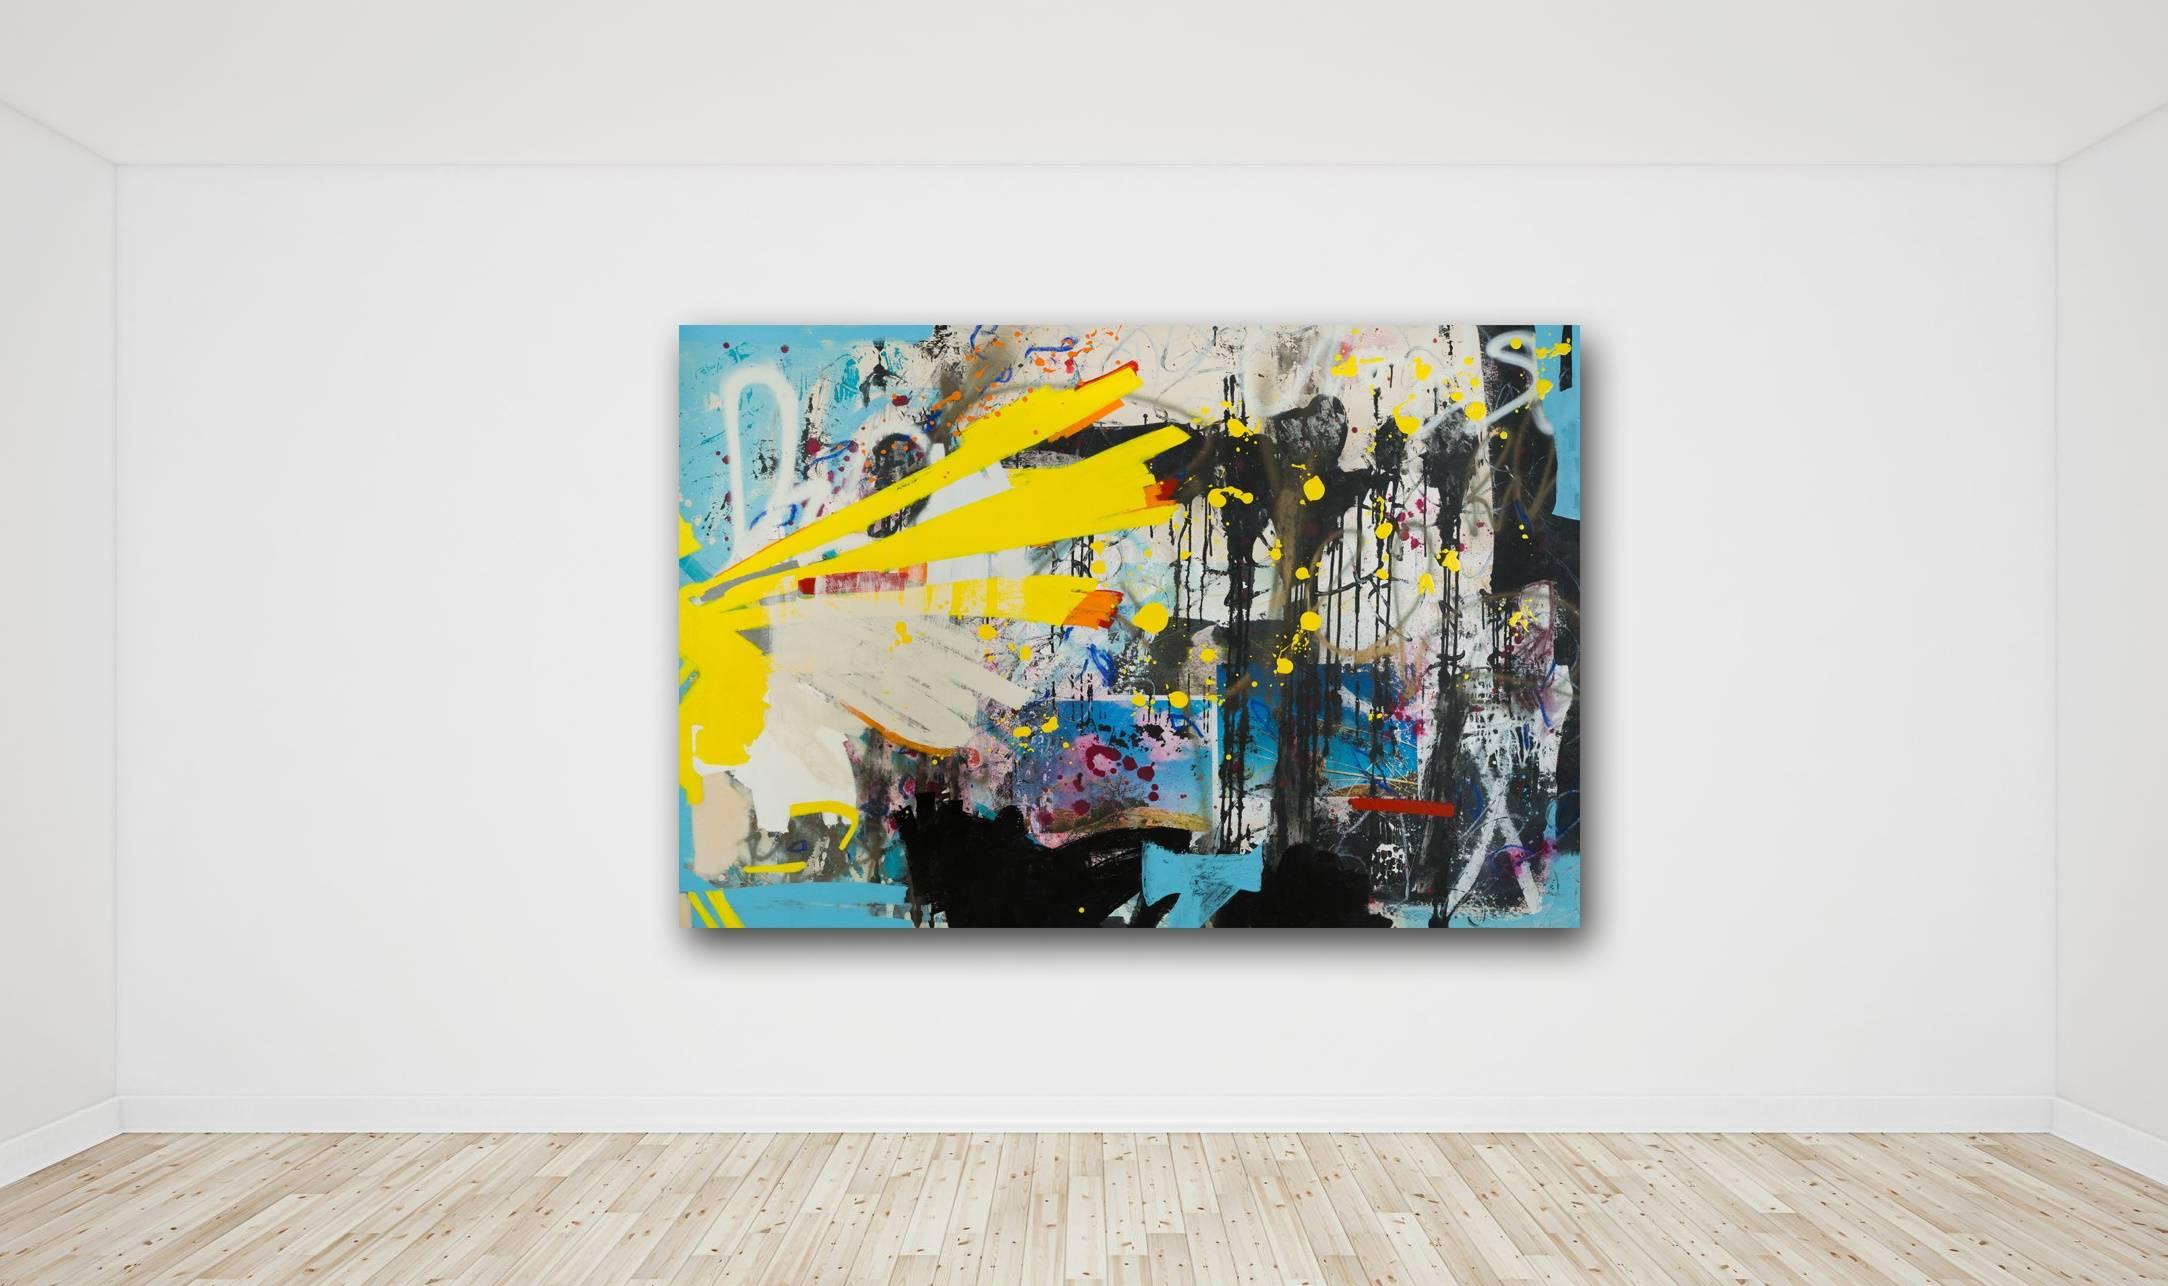 Contemporary Los Angeles artist Laura Letchinger creates large-scale abstract paintings with an urban industrial, minimalist, street or pop art edge. Her mixed-media artworks are layered acrylic on canvas, often combined with other mediums such as